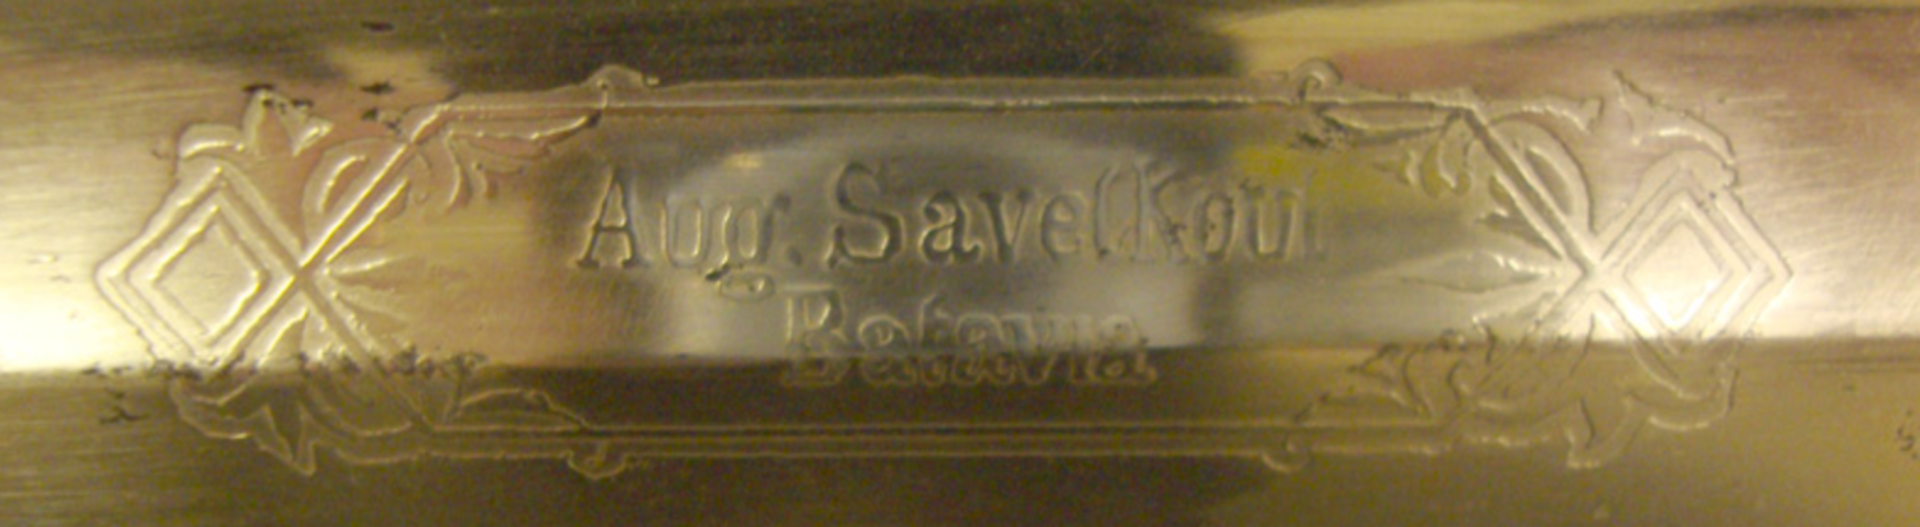 German Heavy Cavalry Sabre Etched 'Aug. Savelkoul Batavia' & Scabbard   This is a nice German - Image 2 of 3